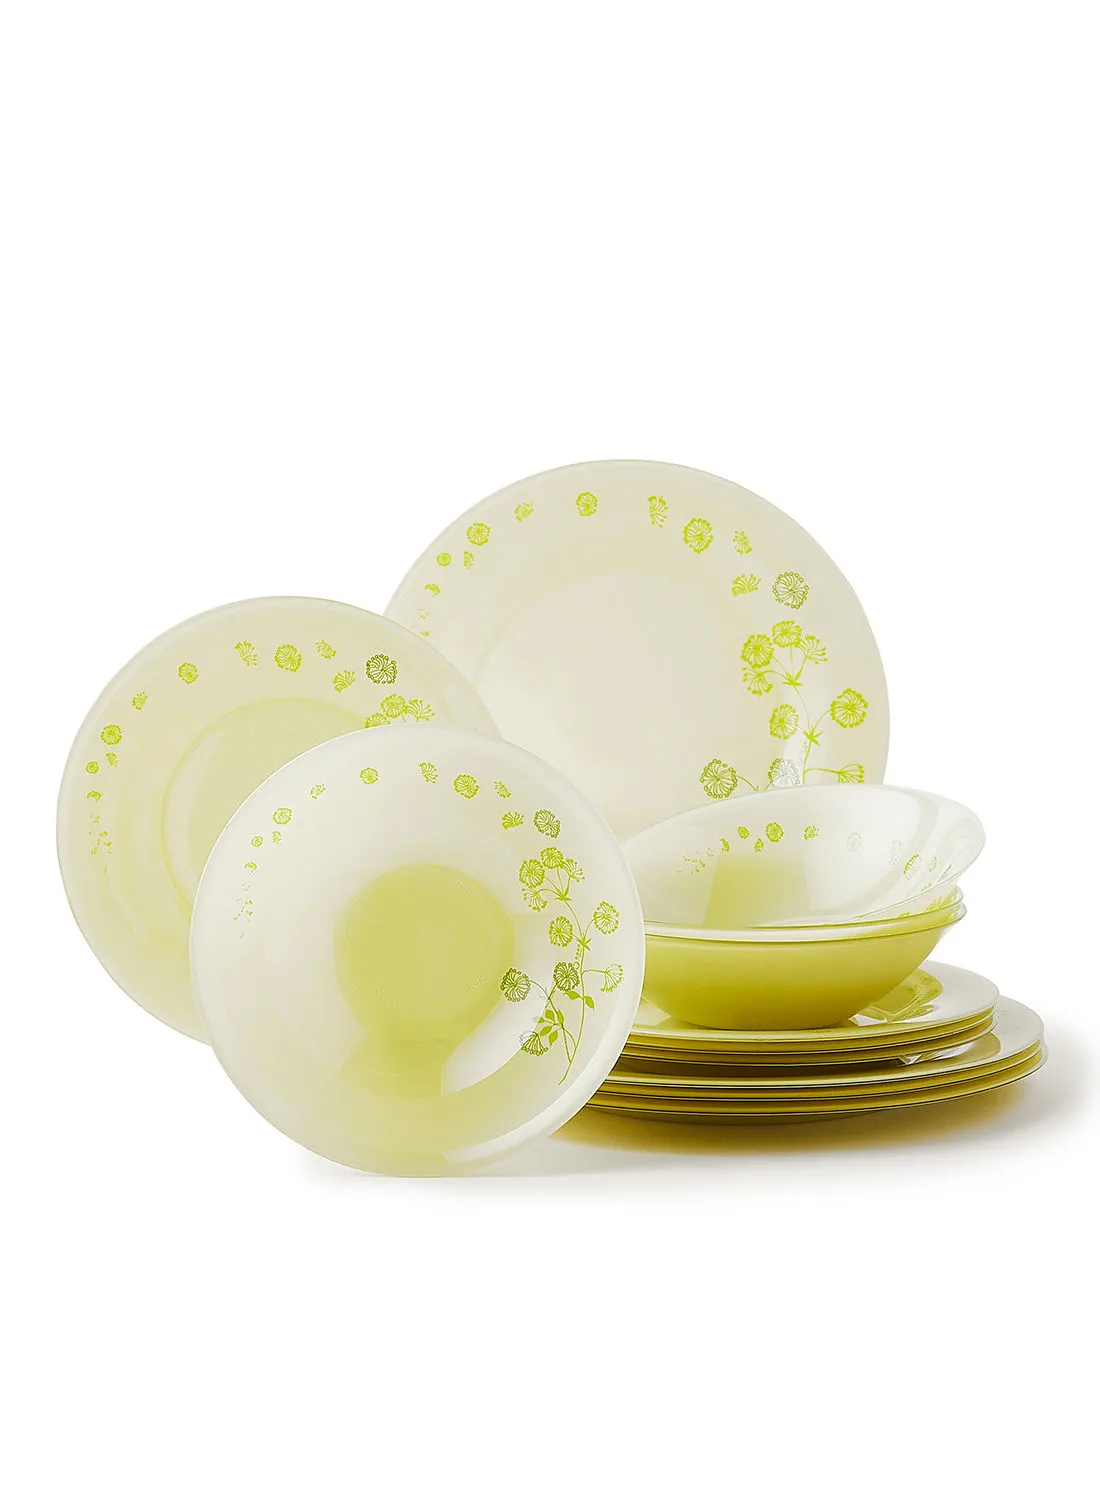 noon east 12 Piece Glass Dinner Set For Everyday Use - Light Weight Dishes, Plates - Dinner Plate, Side Plate, Bowl - Serves 4 - Printed Design Atlantique